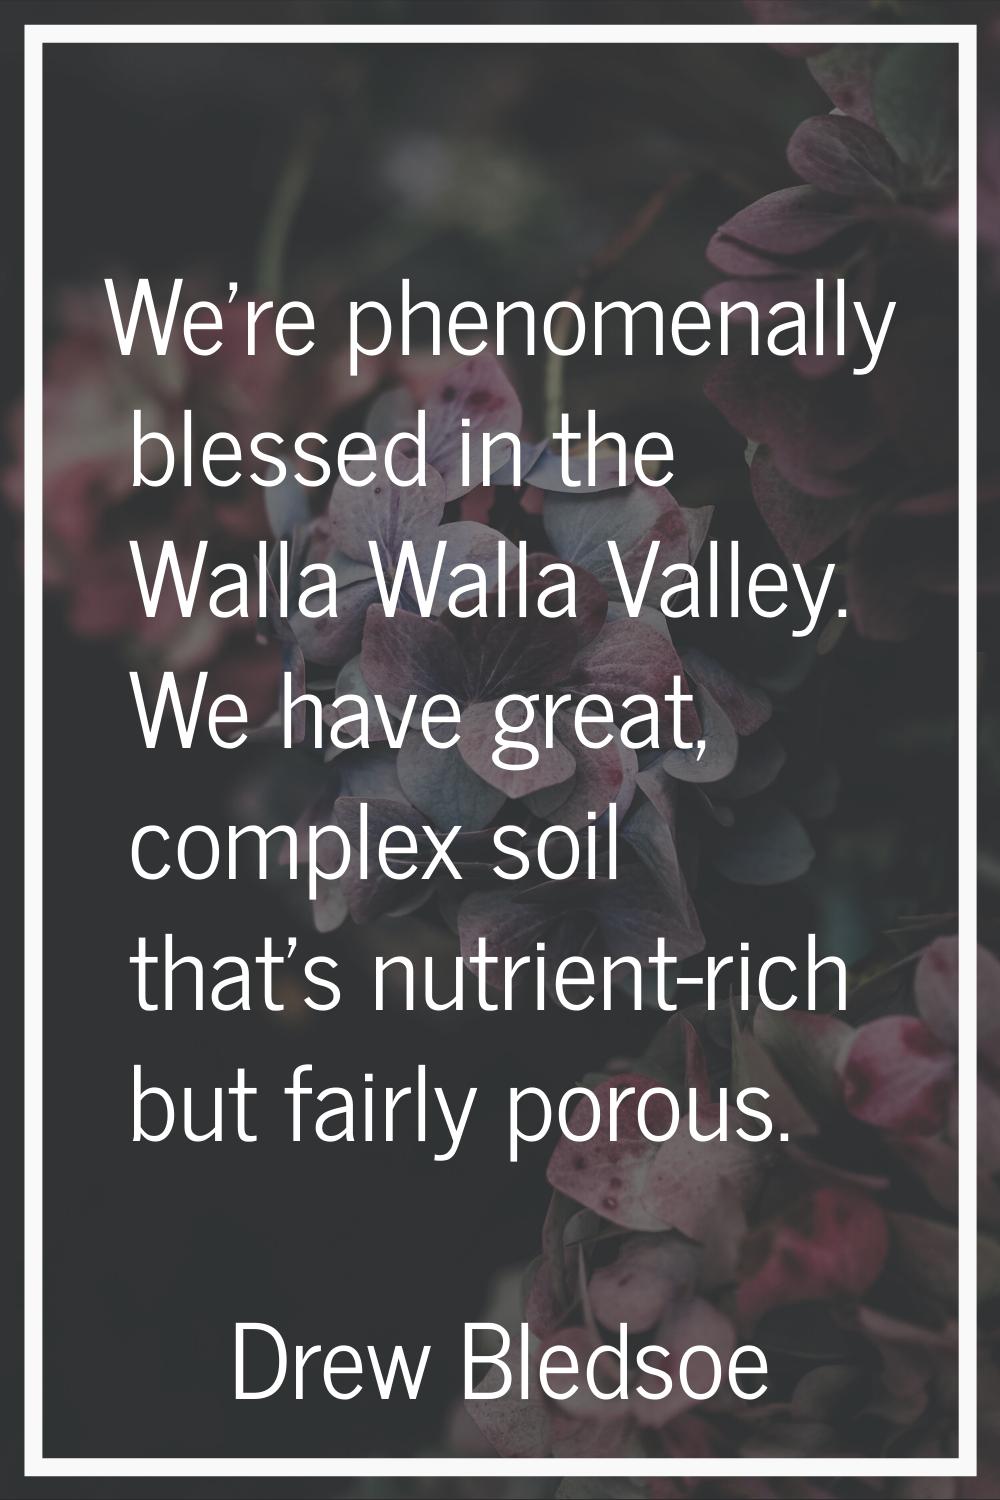 We're phenomenally blessed in the Walla Walla Valley. We have great, complex soil that's nutrient-r